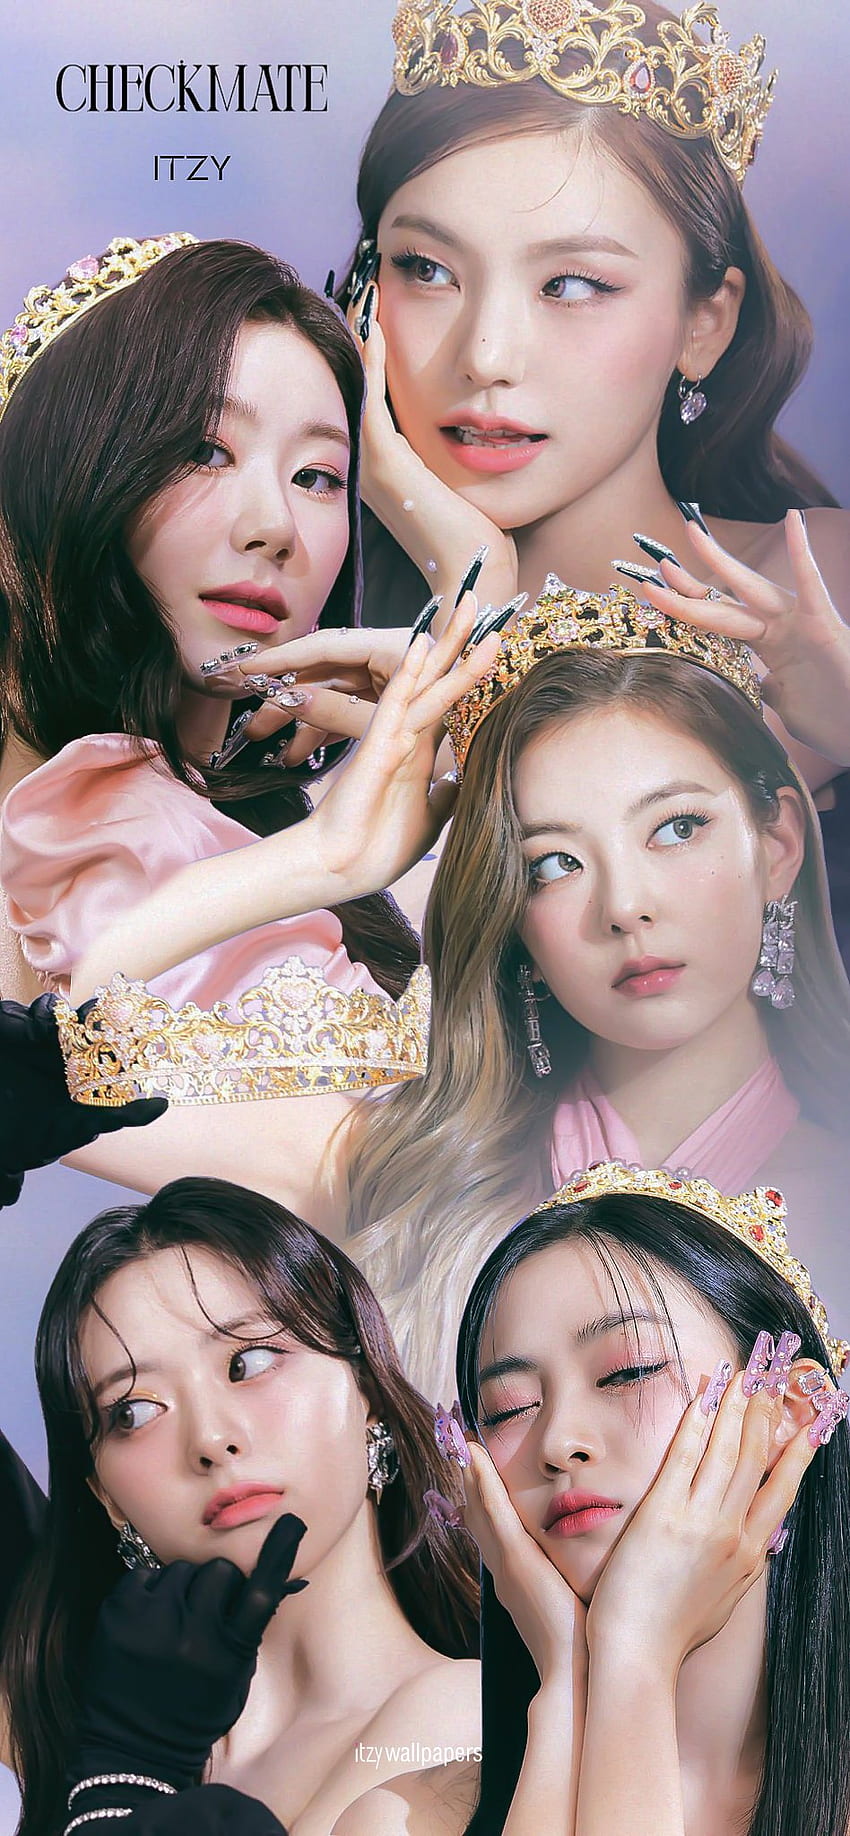 ITZY Crown Checkmate All Members iPhone Phone HD Wallpaper #8581g